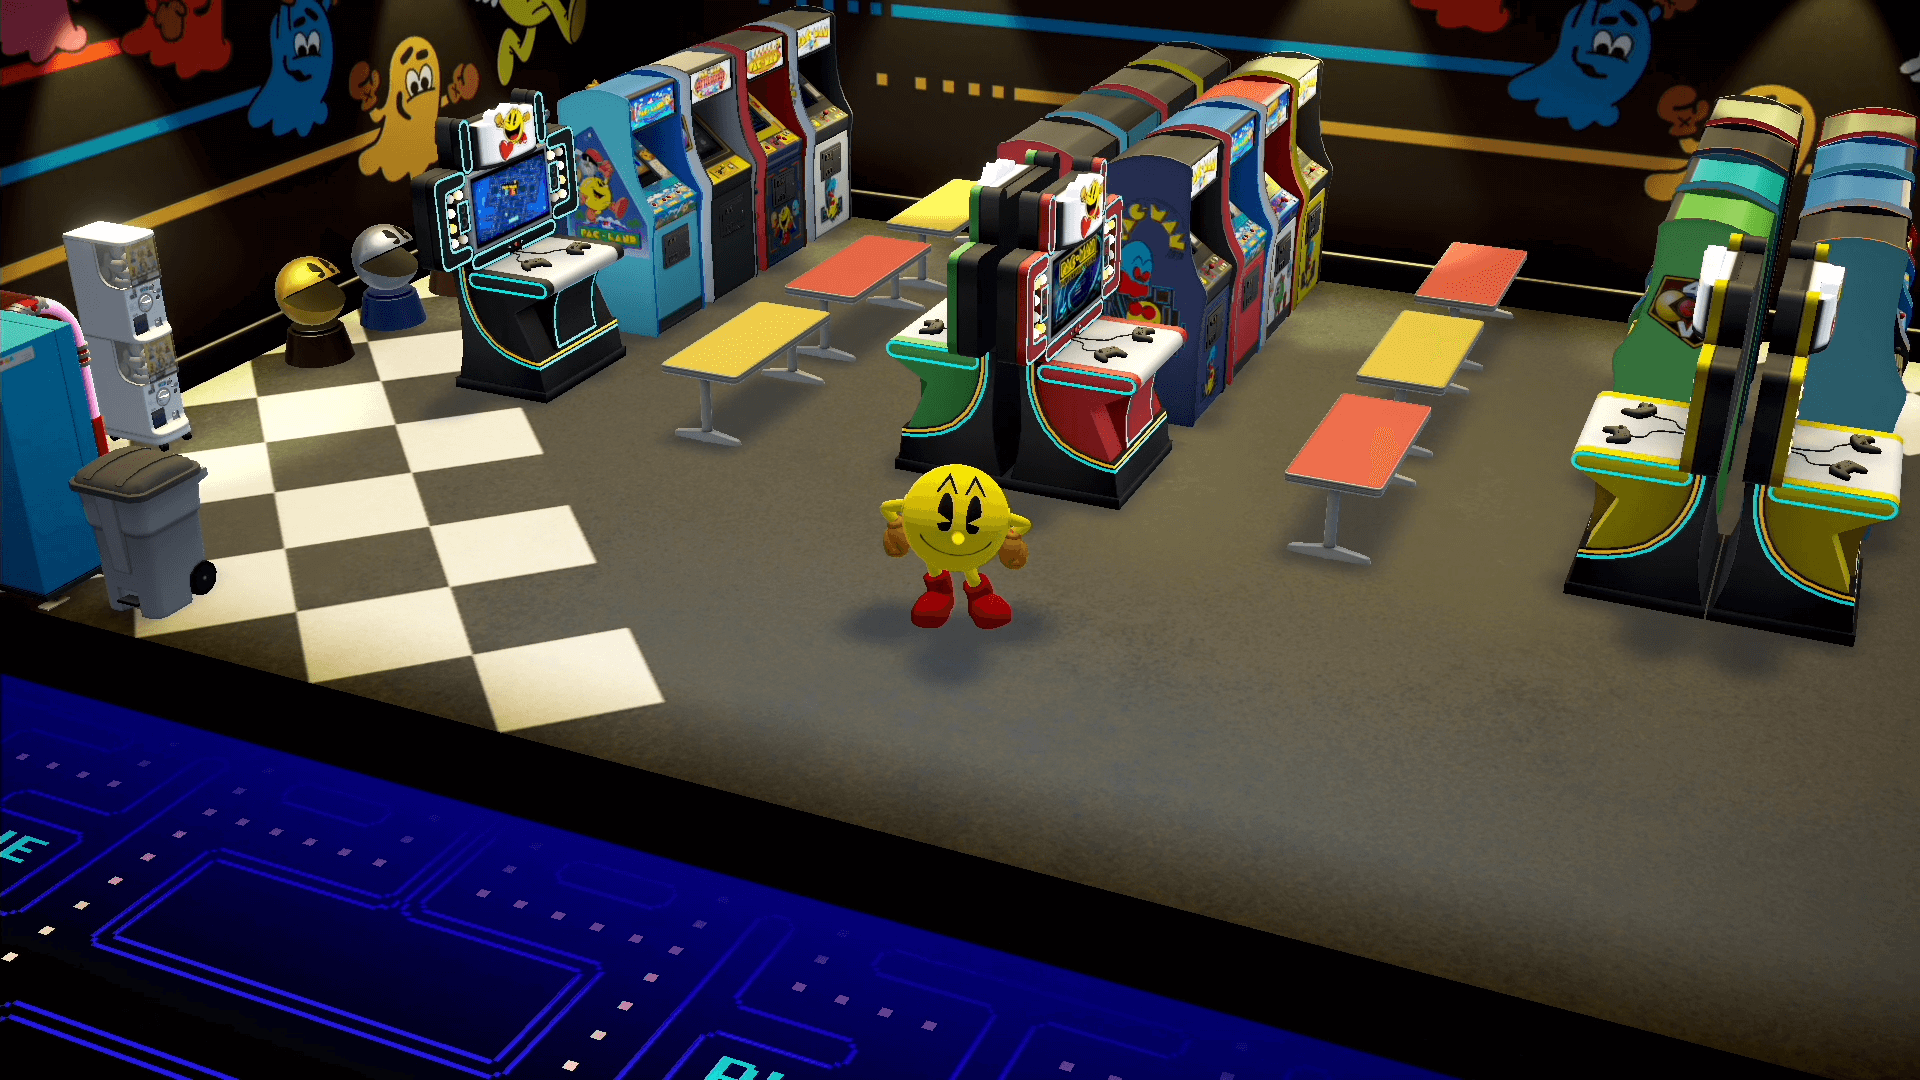 Video game screenshot of Pac-Man standing in a room full of Pac-Man arcade machines